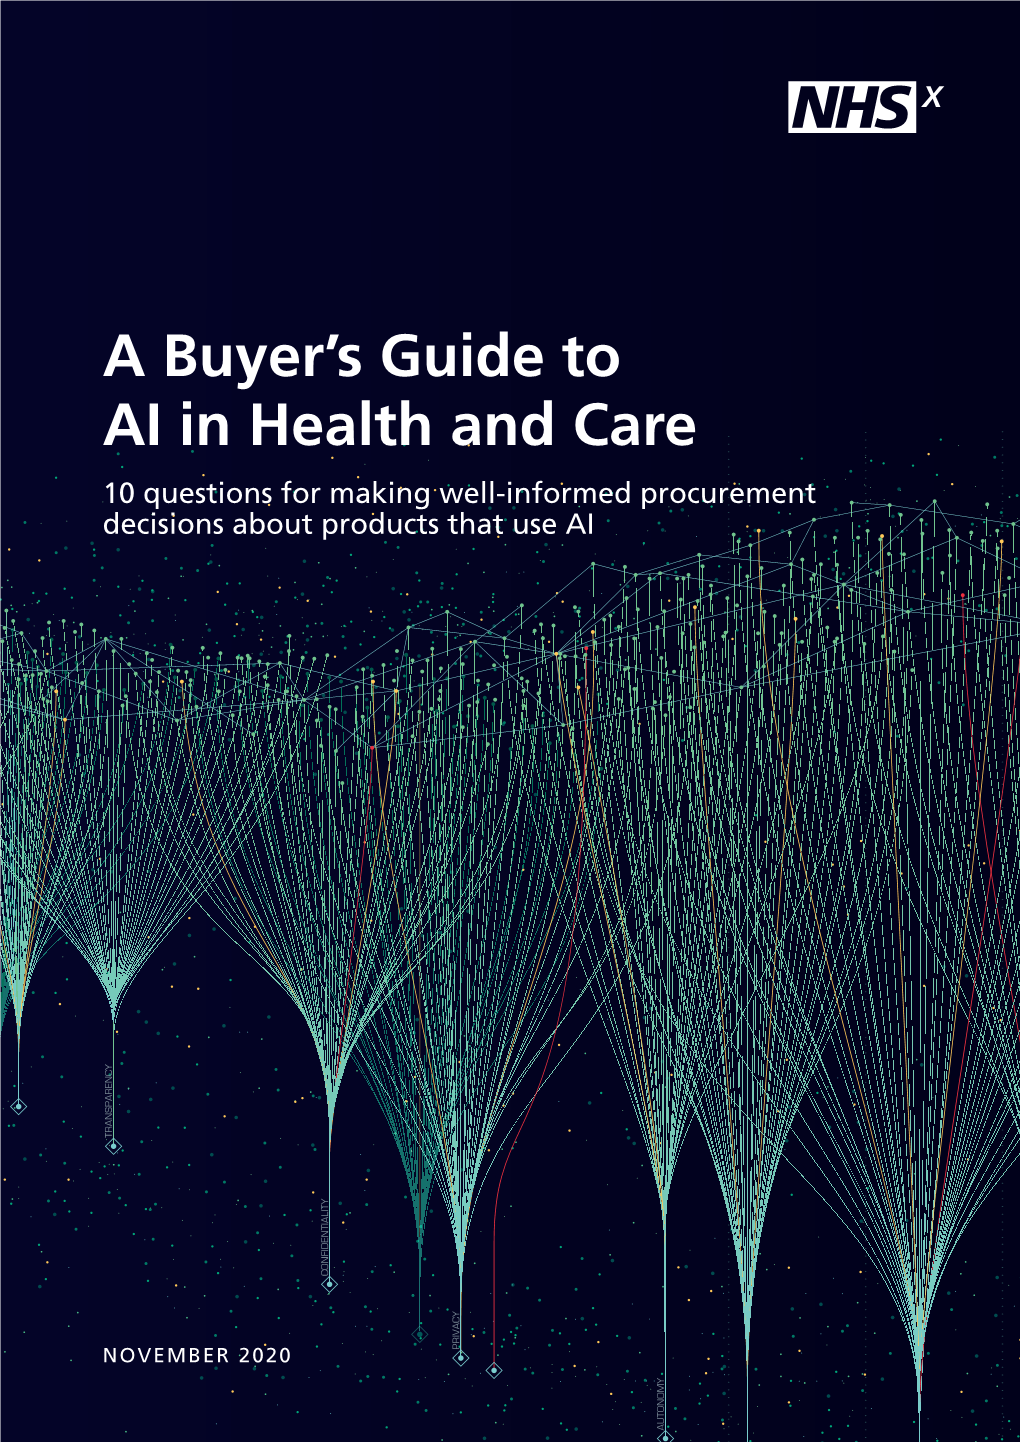 A Buyer's Guide to AI in Health and Care